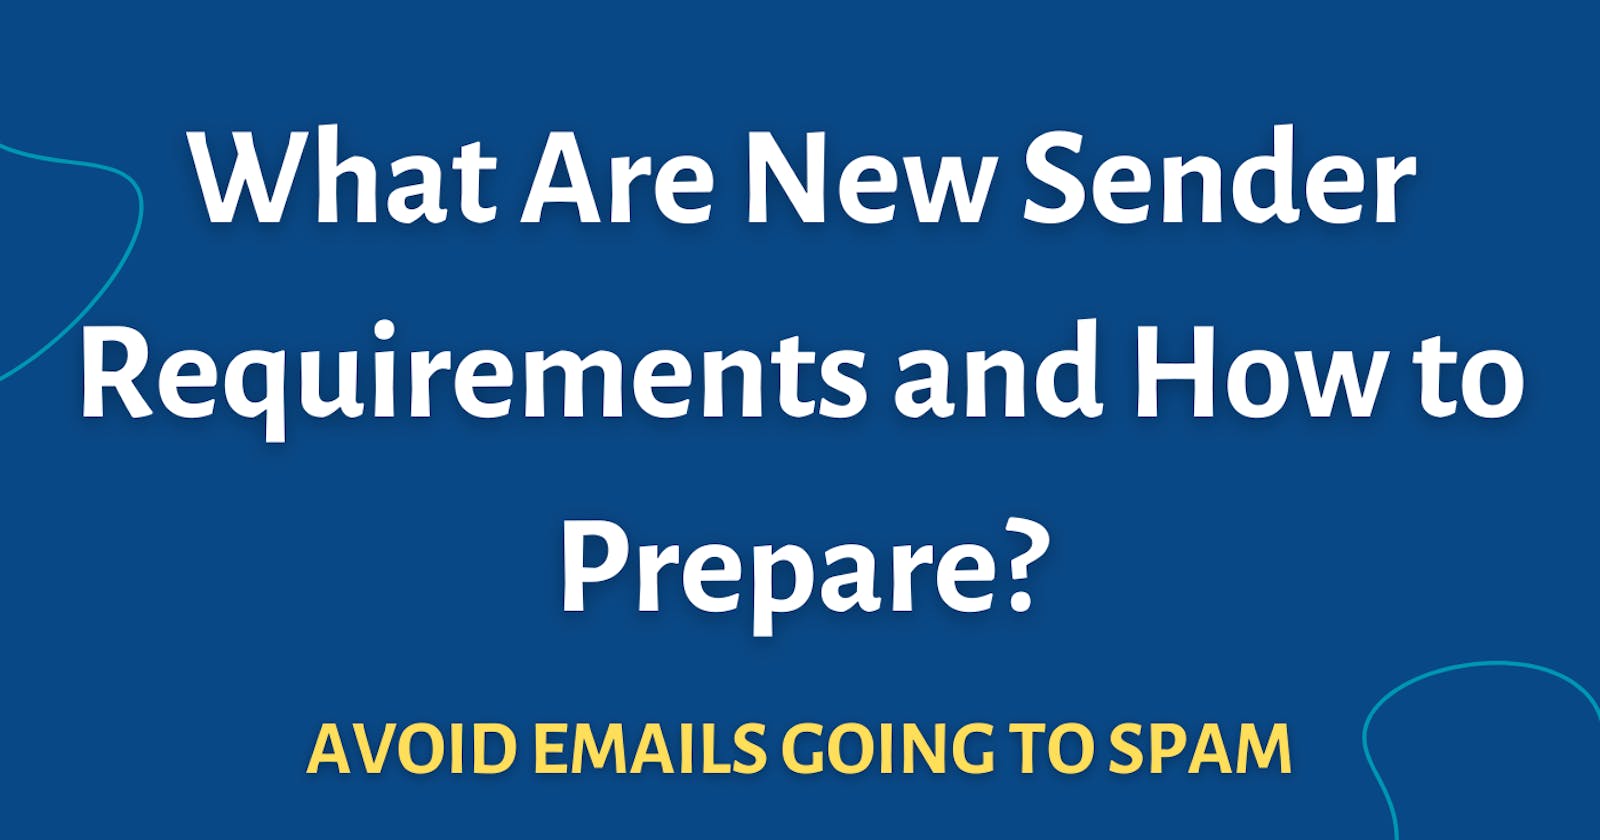 What Are New Sender Requirements and How to Prepare?